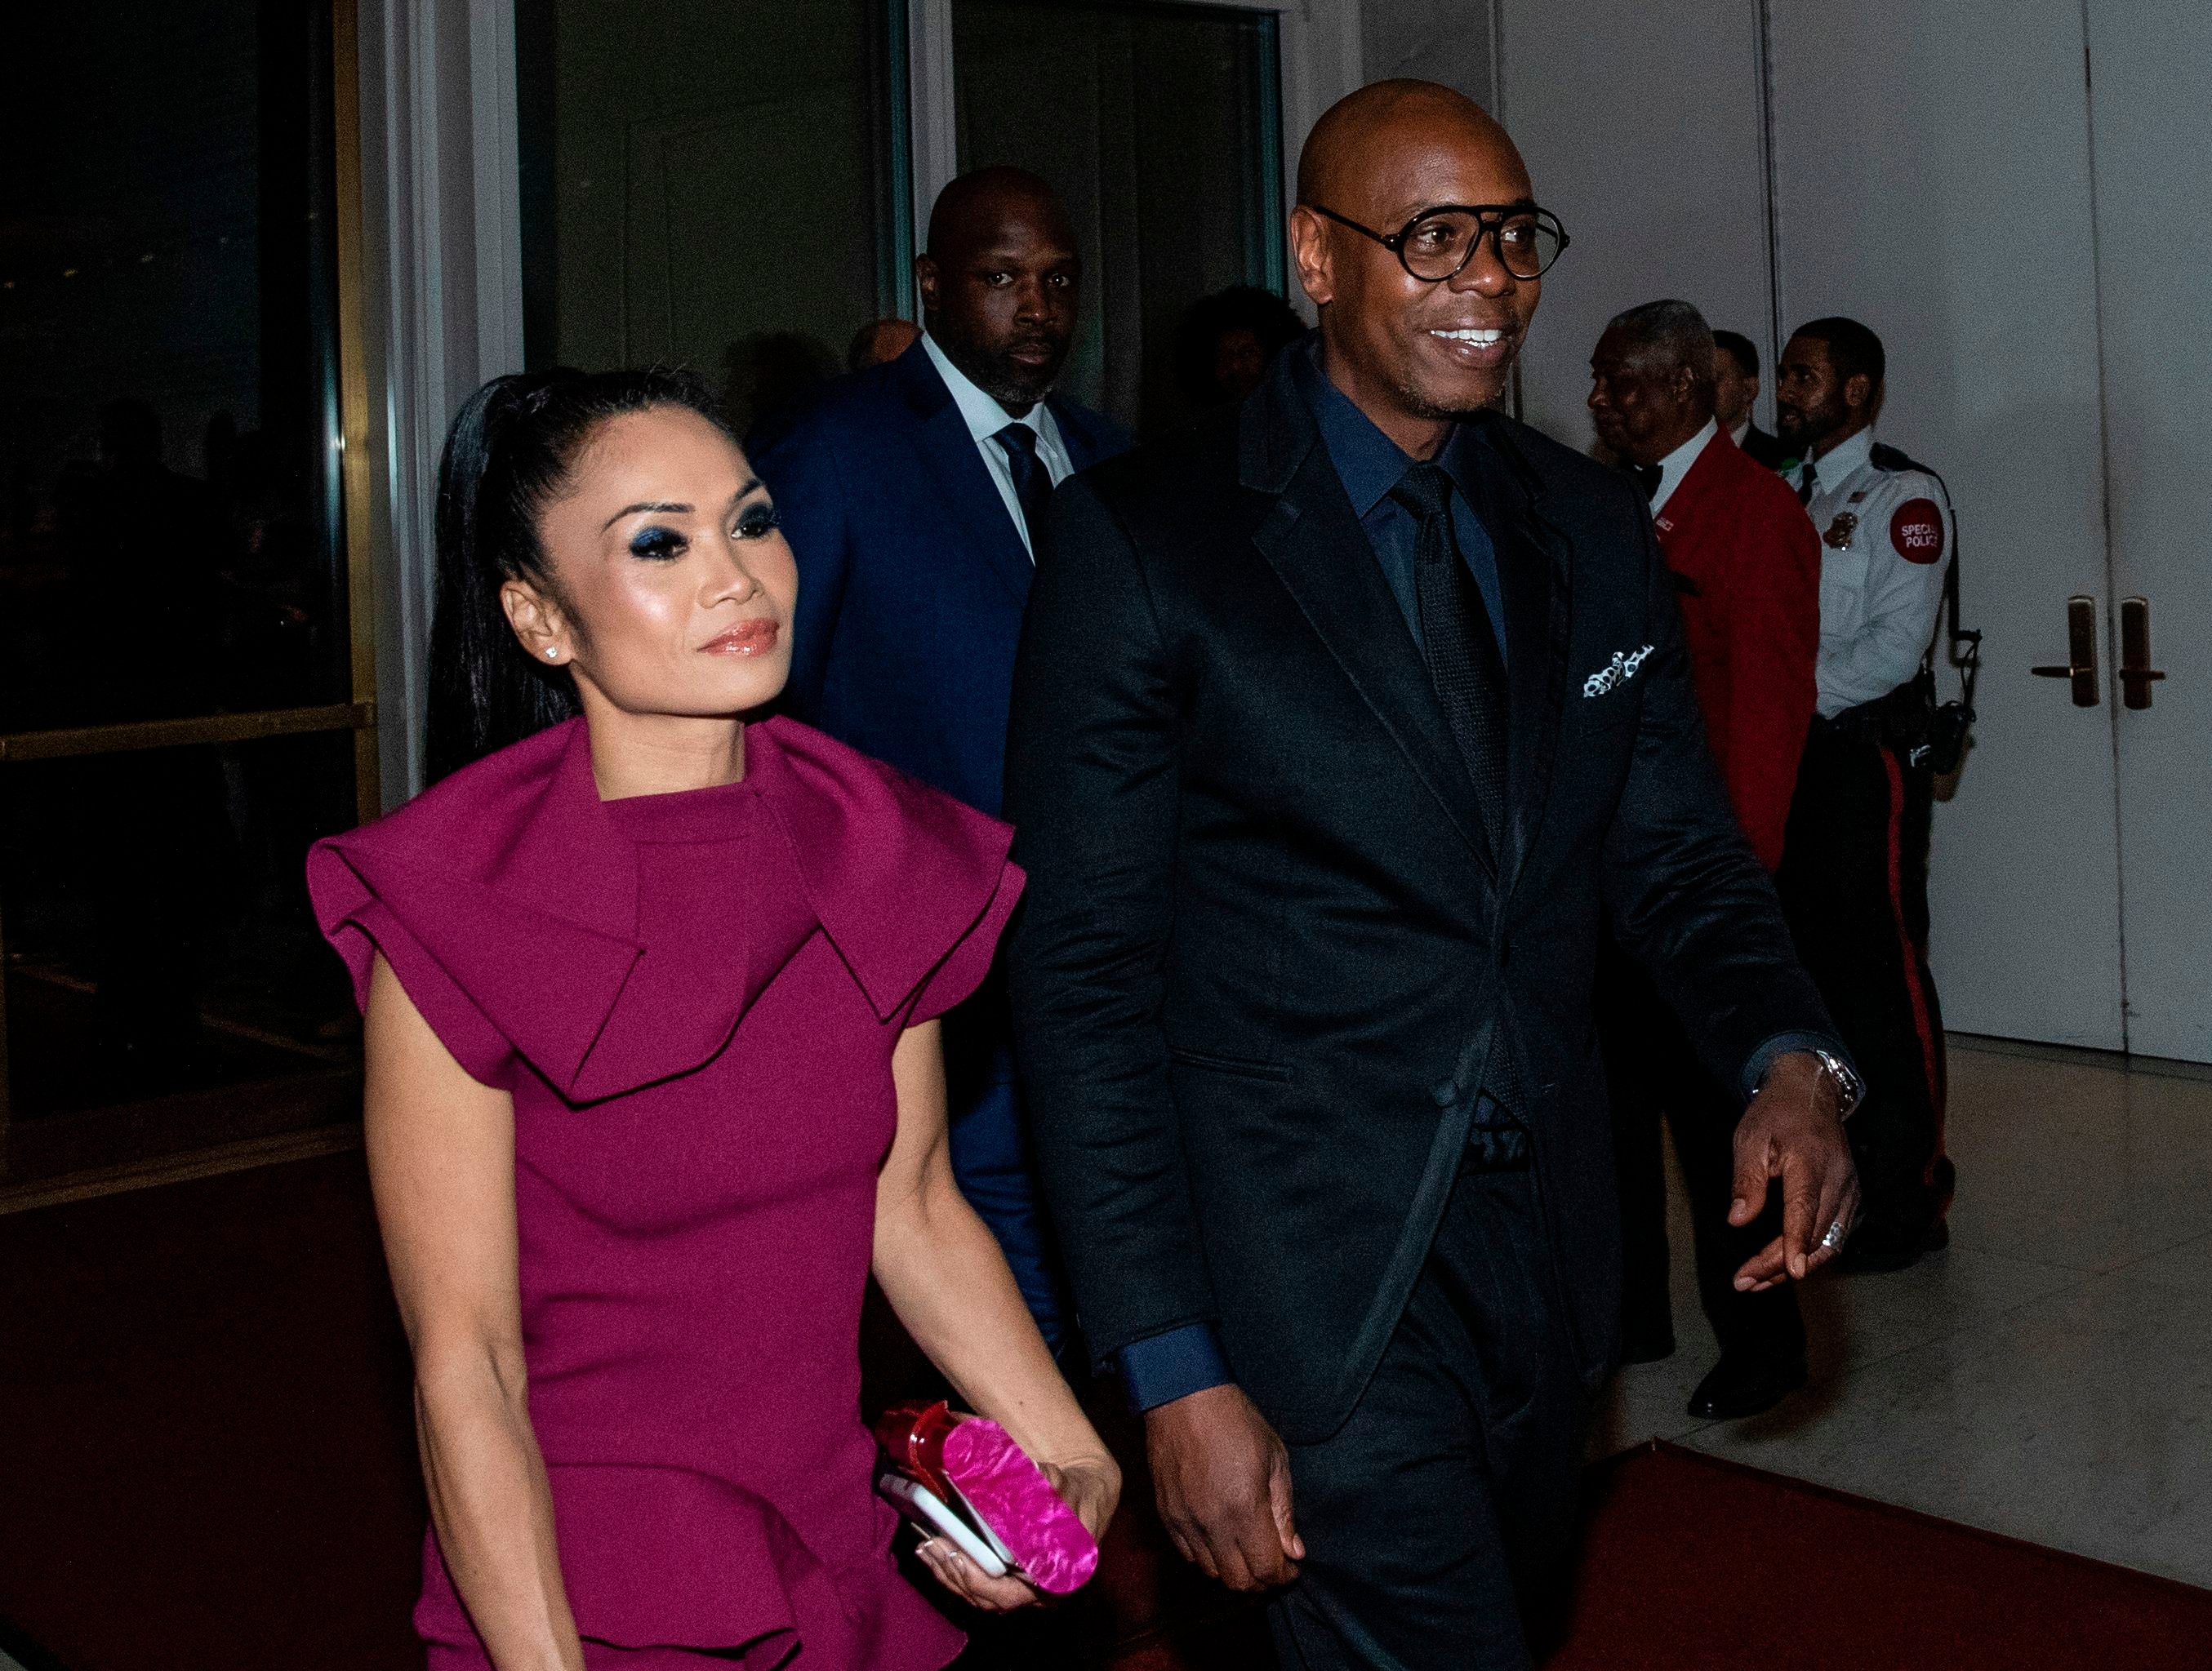 Dave Chappelle and his wife Elaine, who does pay attention to her husband's haters, arriving together at the Kennedy Center